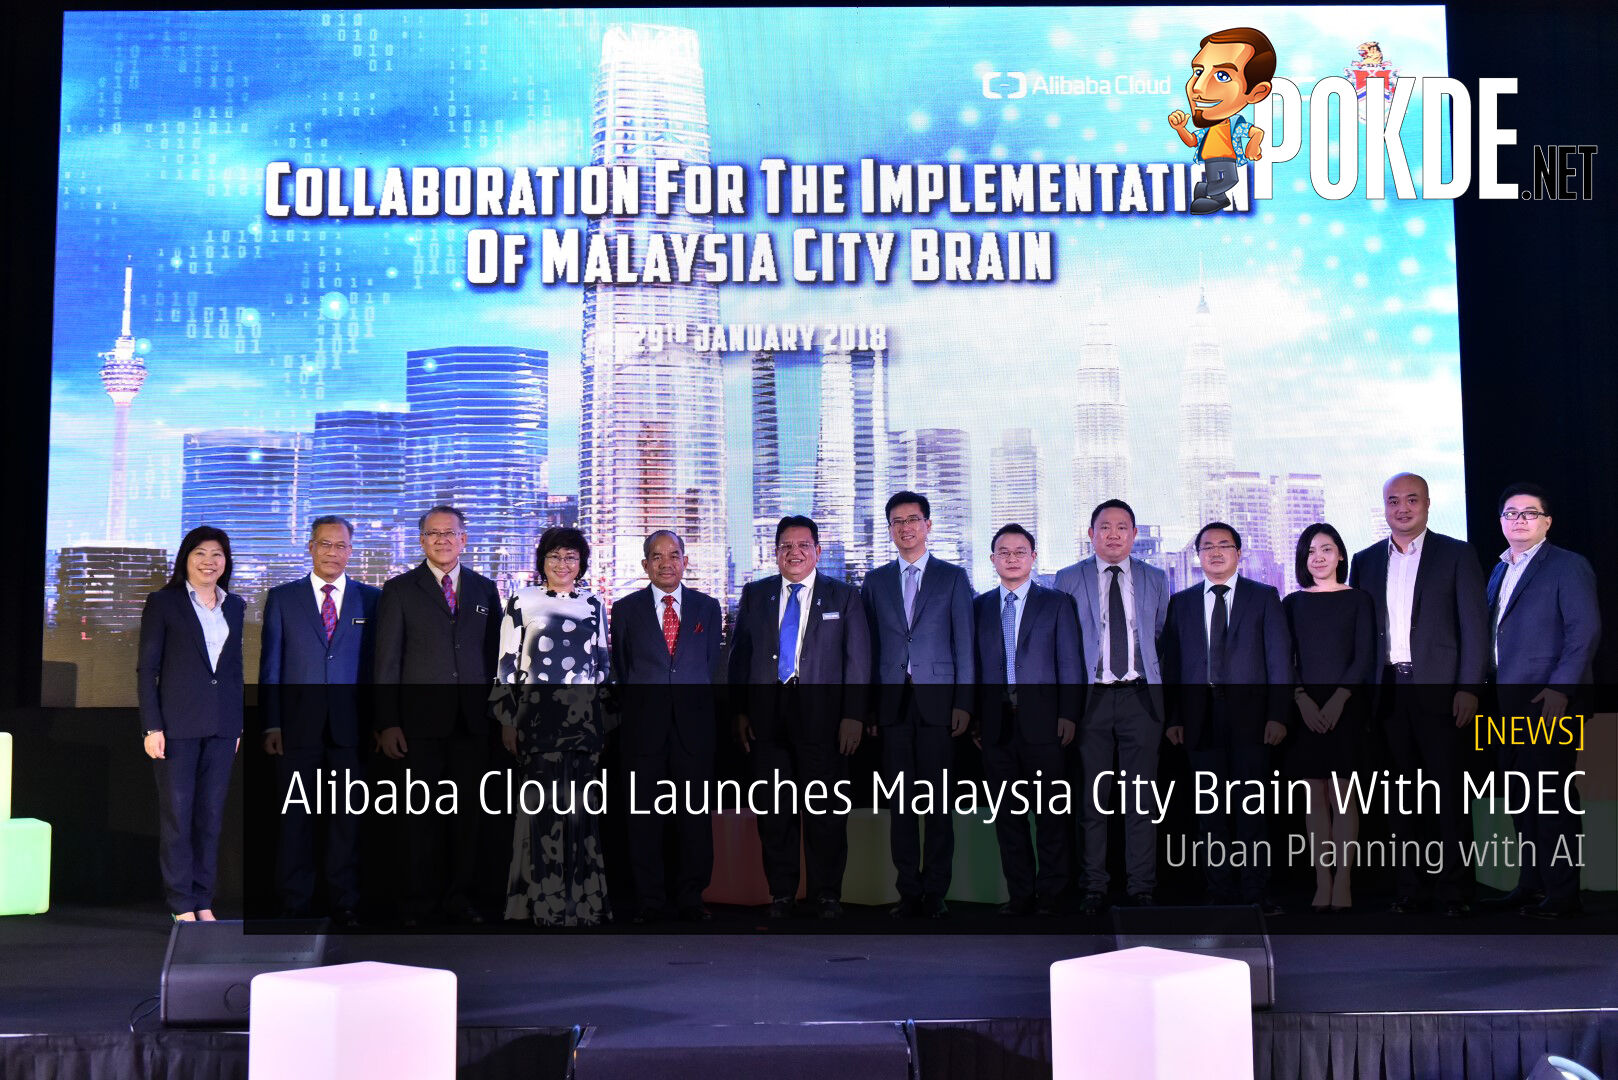 Alibaba Cloud Launches Malaysia City Brain With MDEC - Urban Planning with AI 30